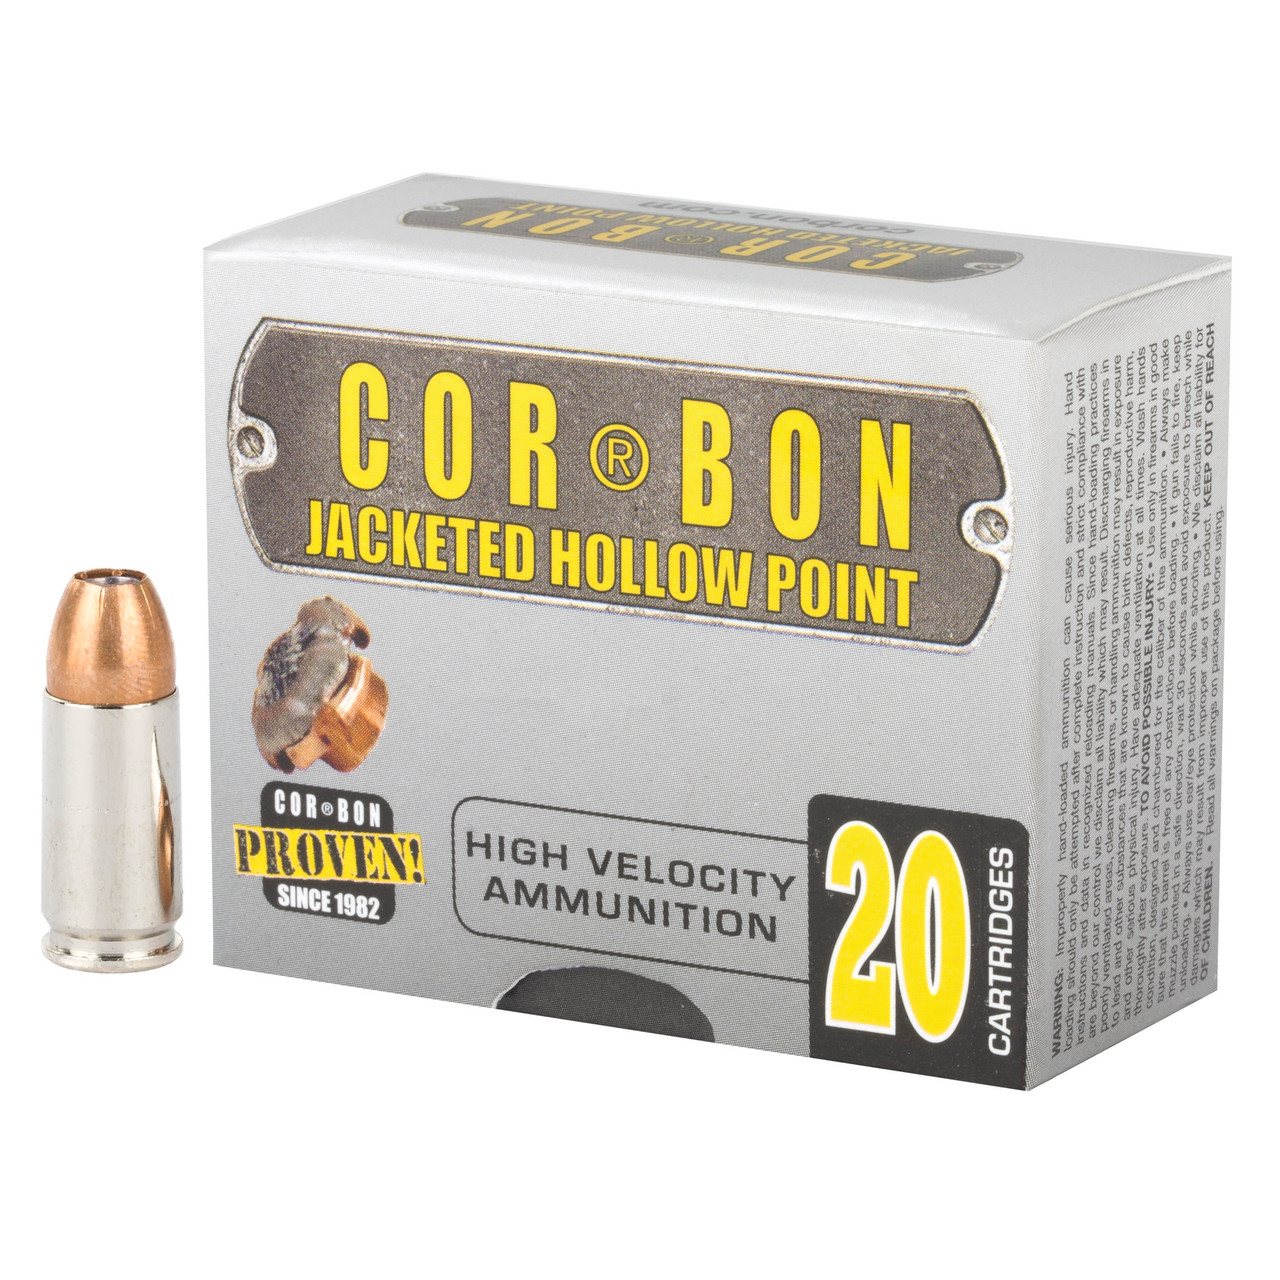 9mm bullet hollow point